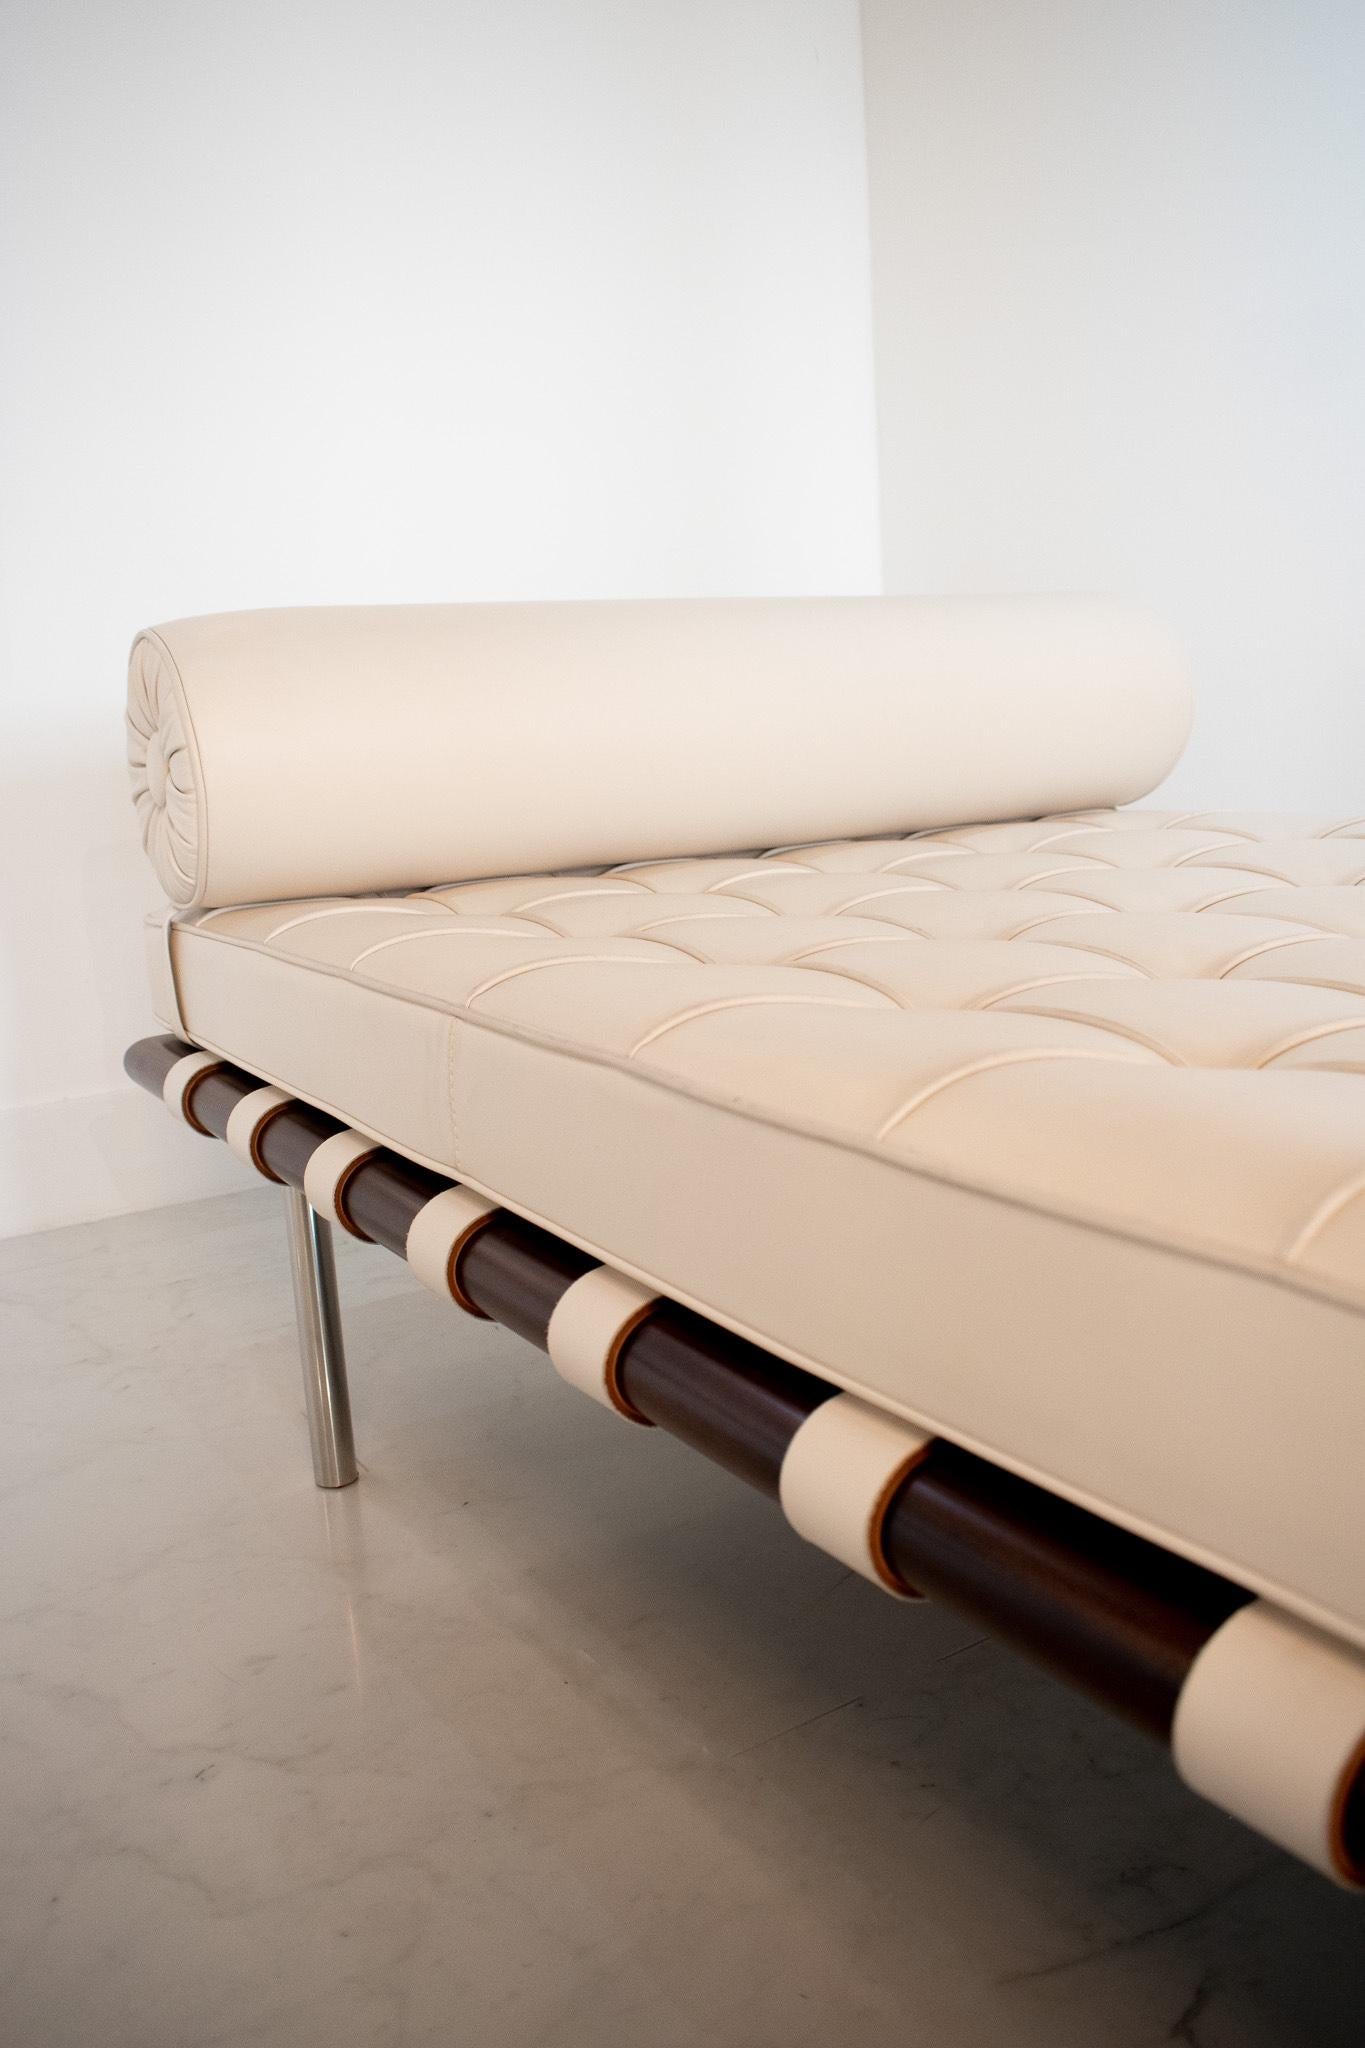 Barcelona Day Bed by Mies van der Rohe for Knoll Studio Cream Leather 1